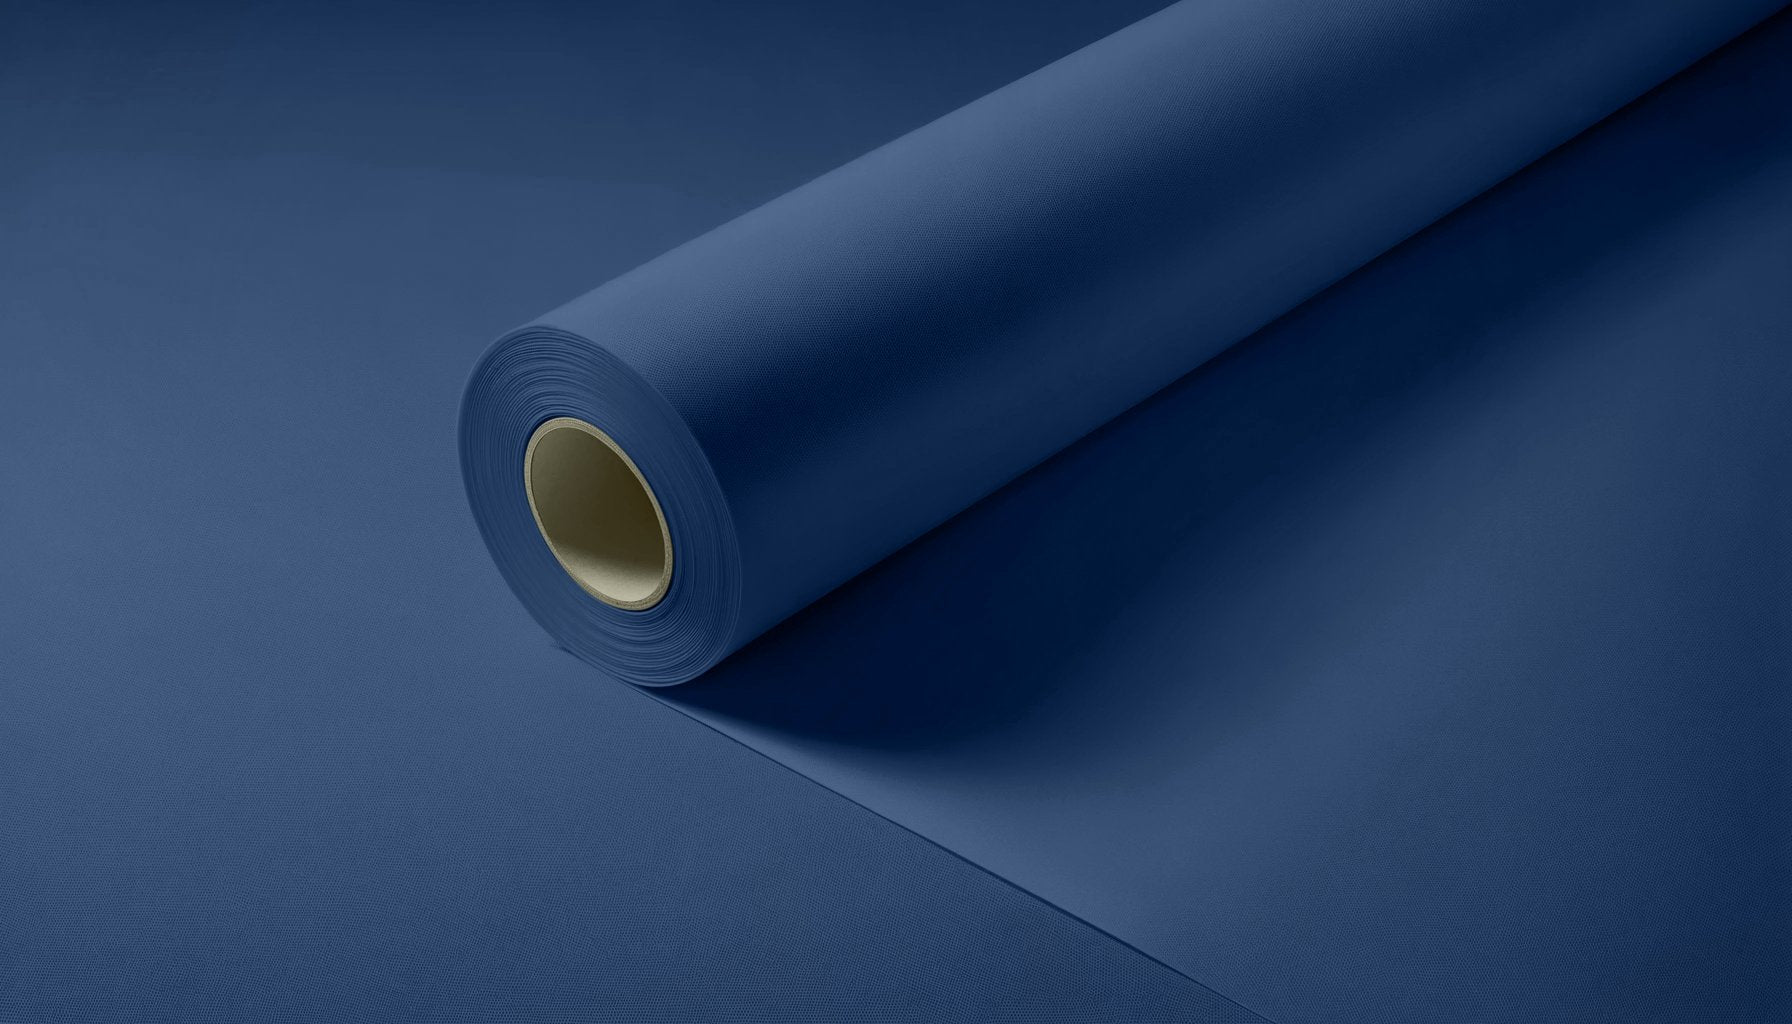 Peel & Stick Removable Re-usable Paint - Color RAL 5013 Cobalt Blue - offRAL™ - RALRAW LLC, USA